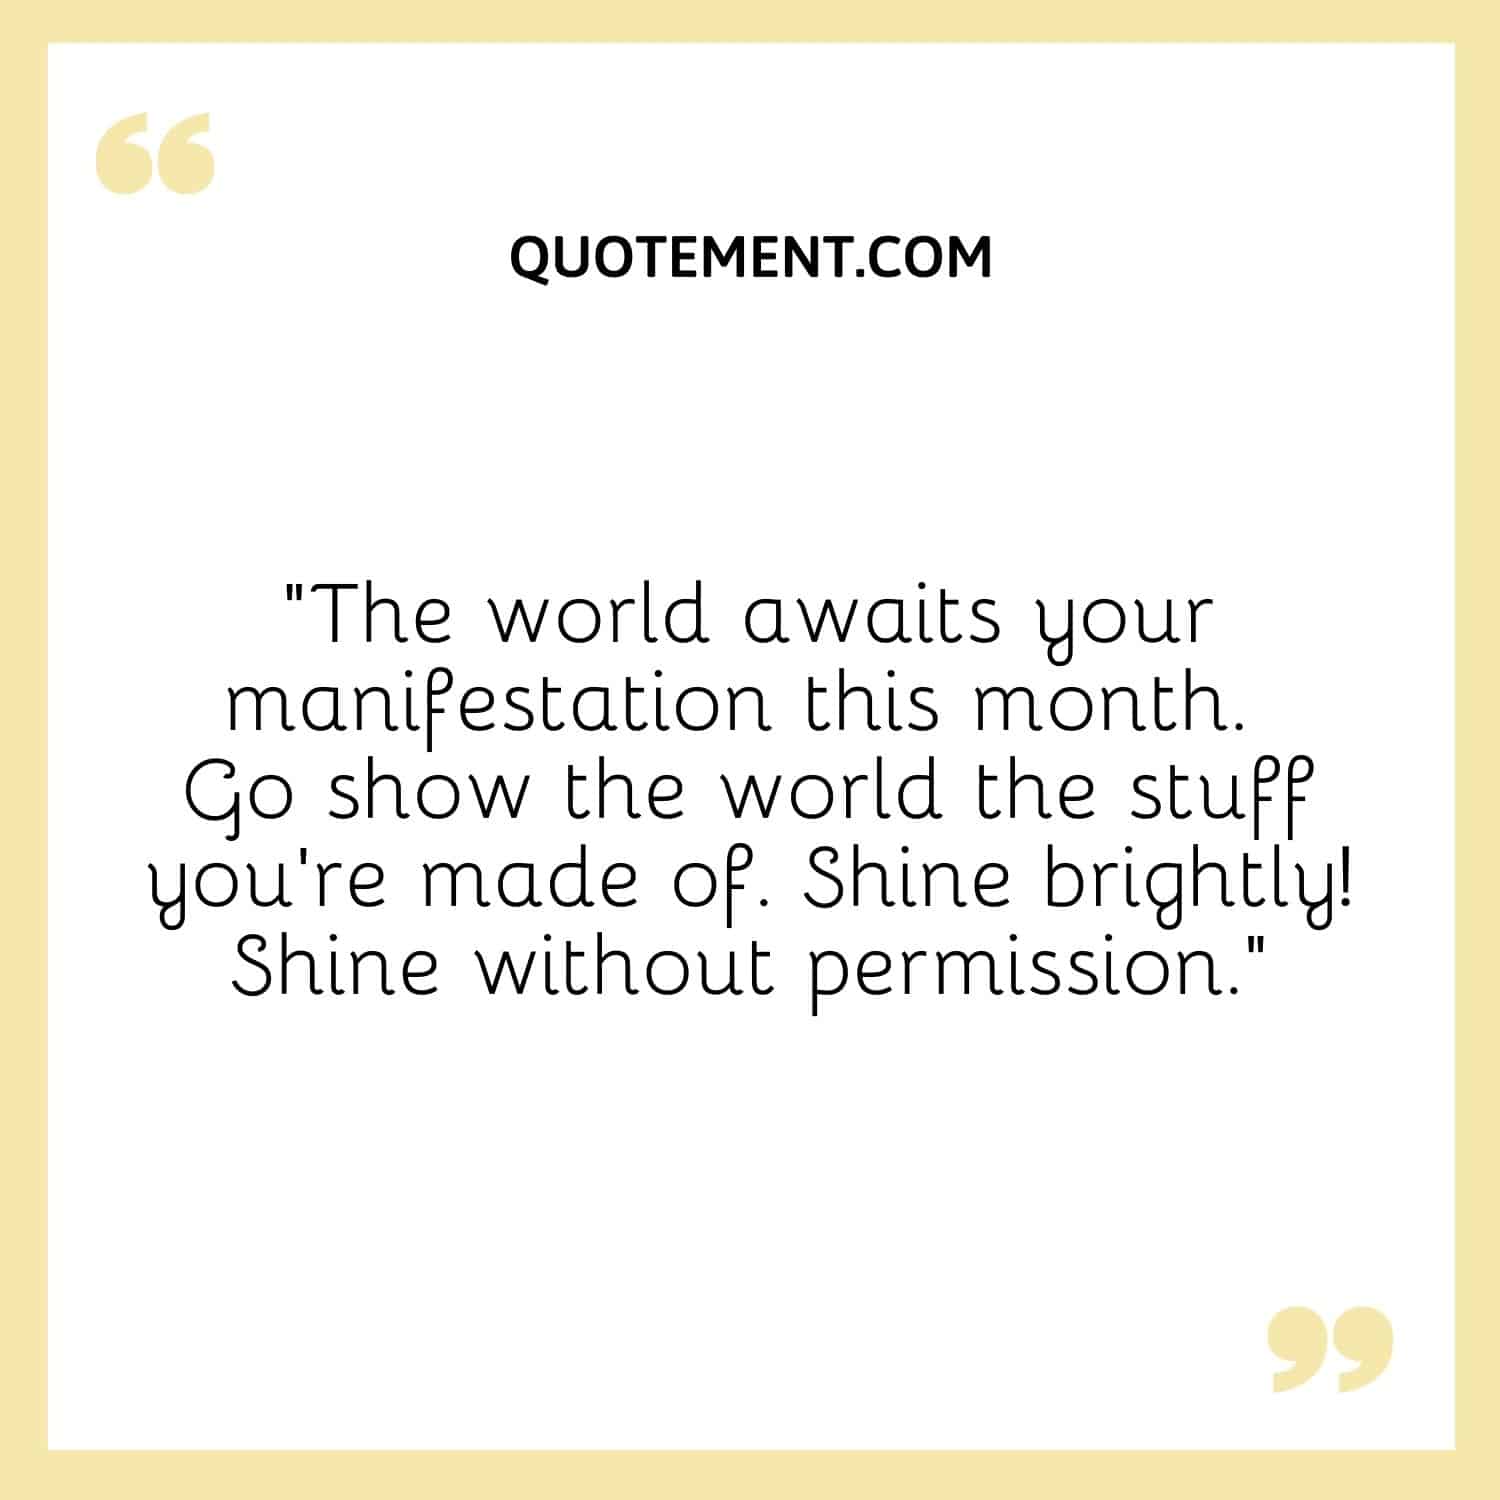 The world awaits your manifestation this month